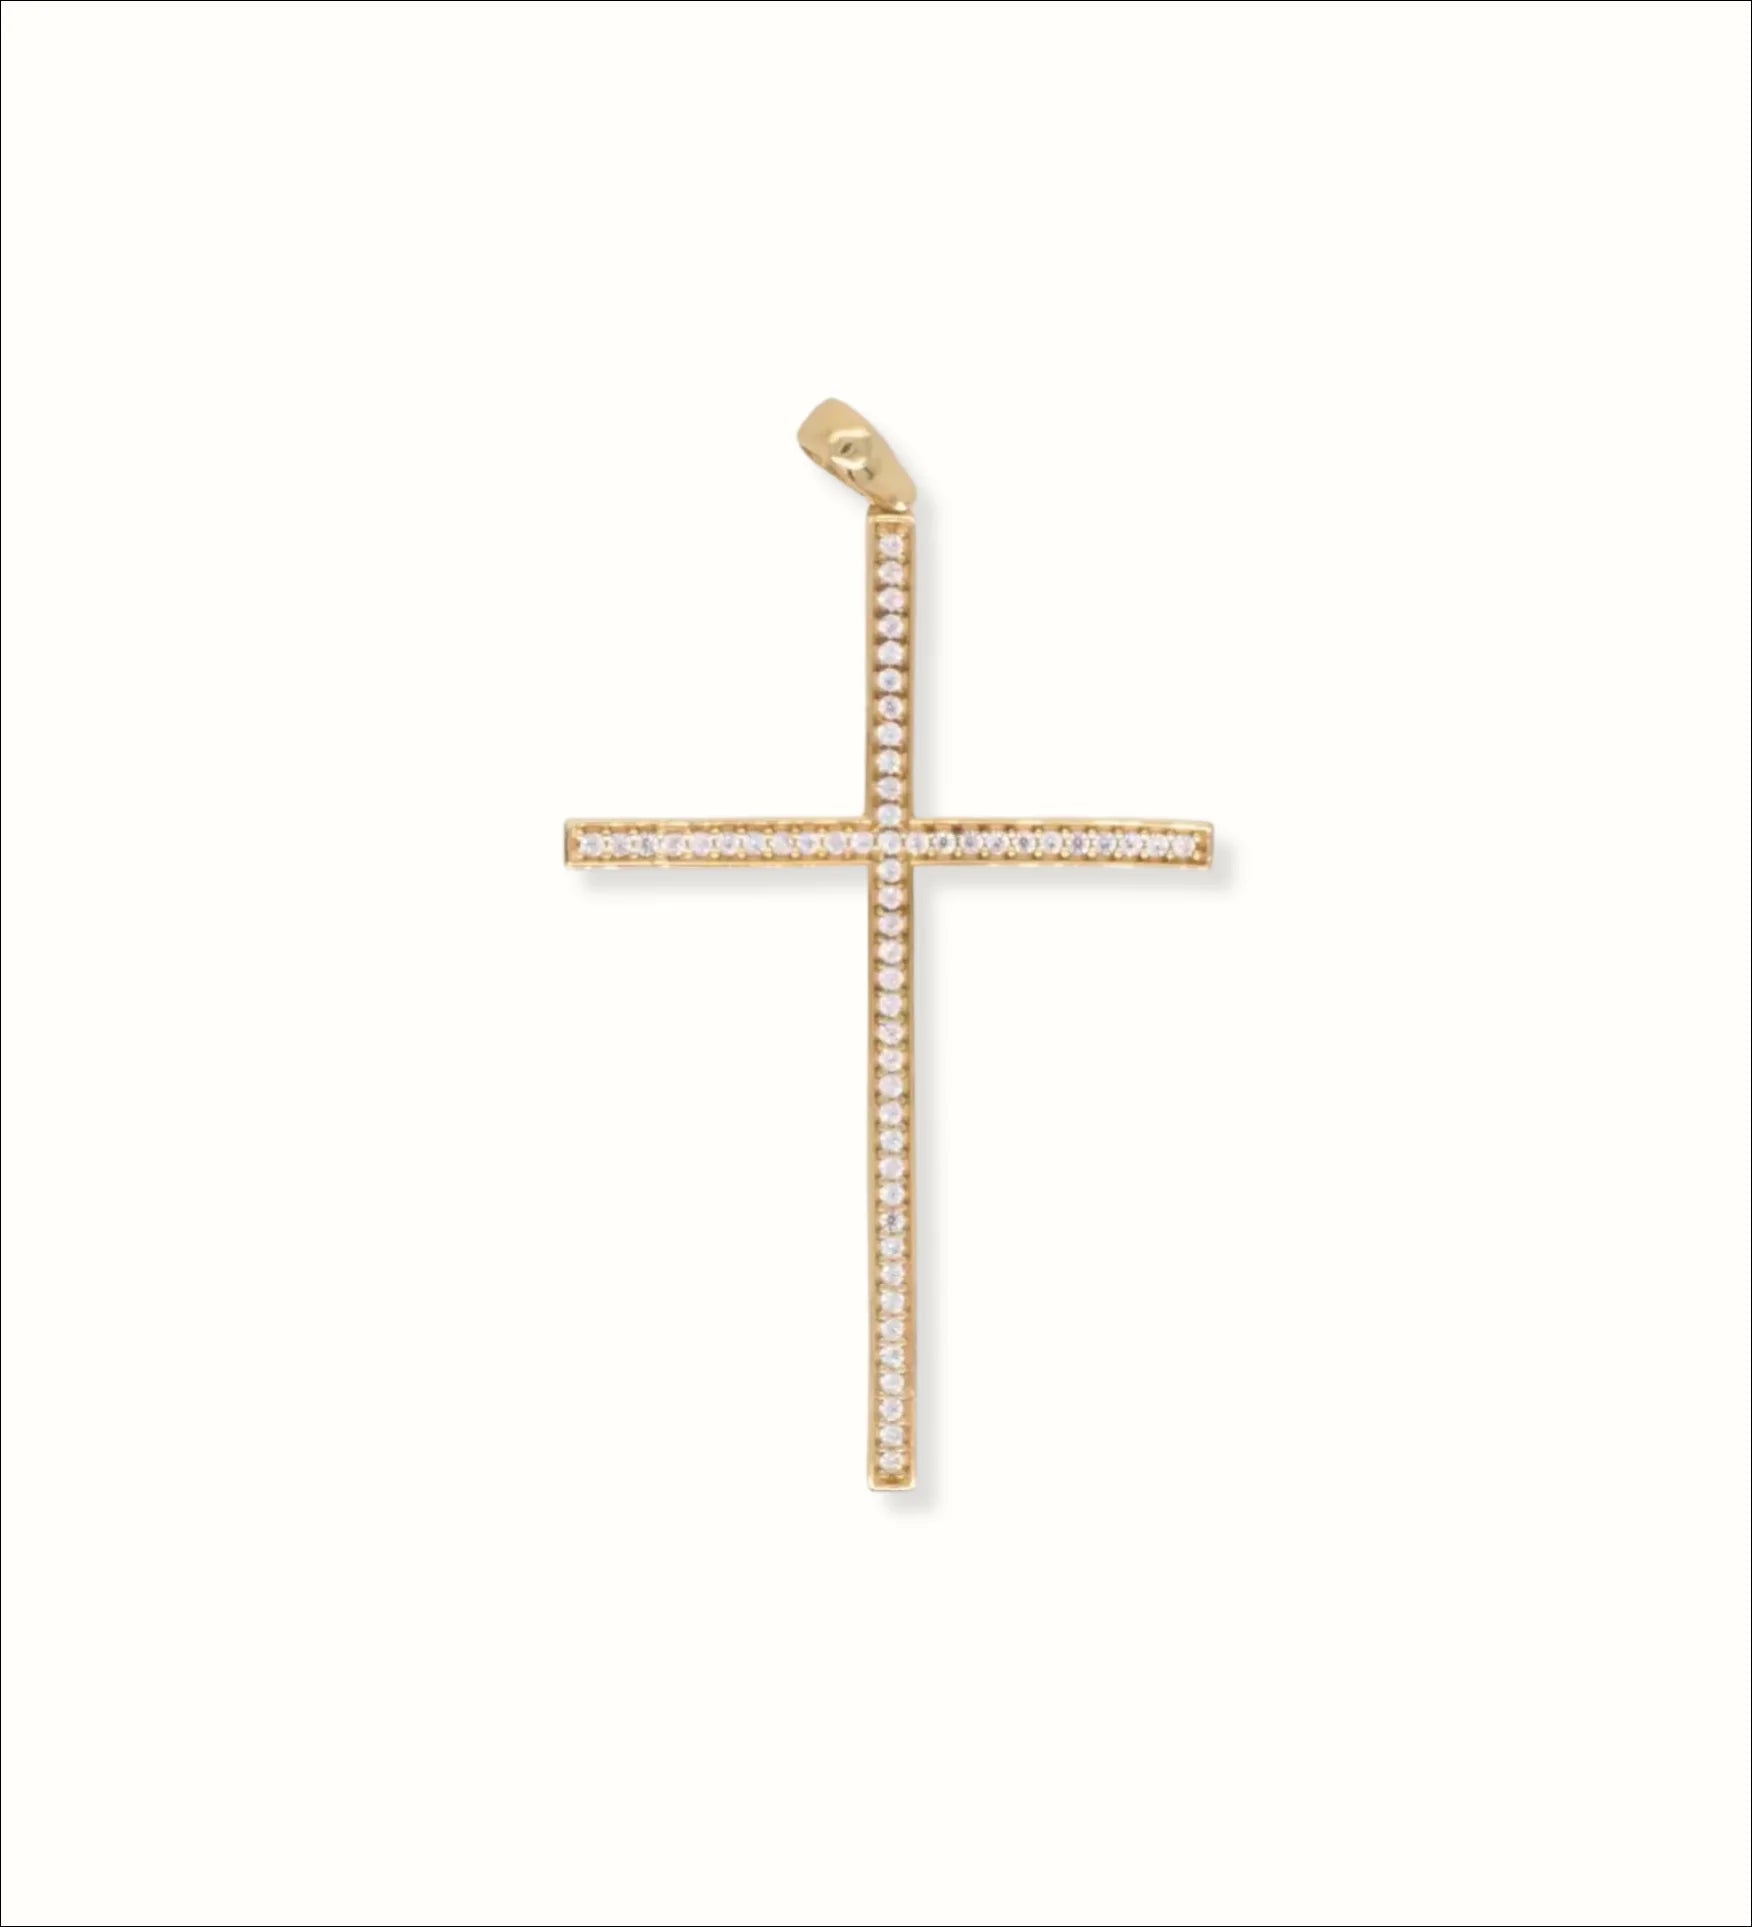 Art Gold Jewelry Unveils: The 18k Cross Adorned with CZ